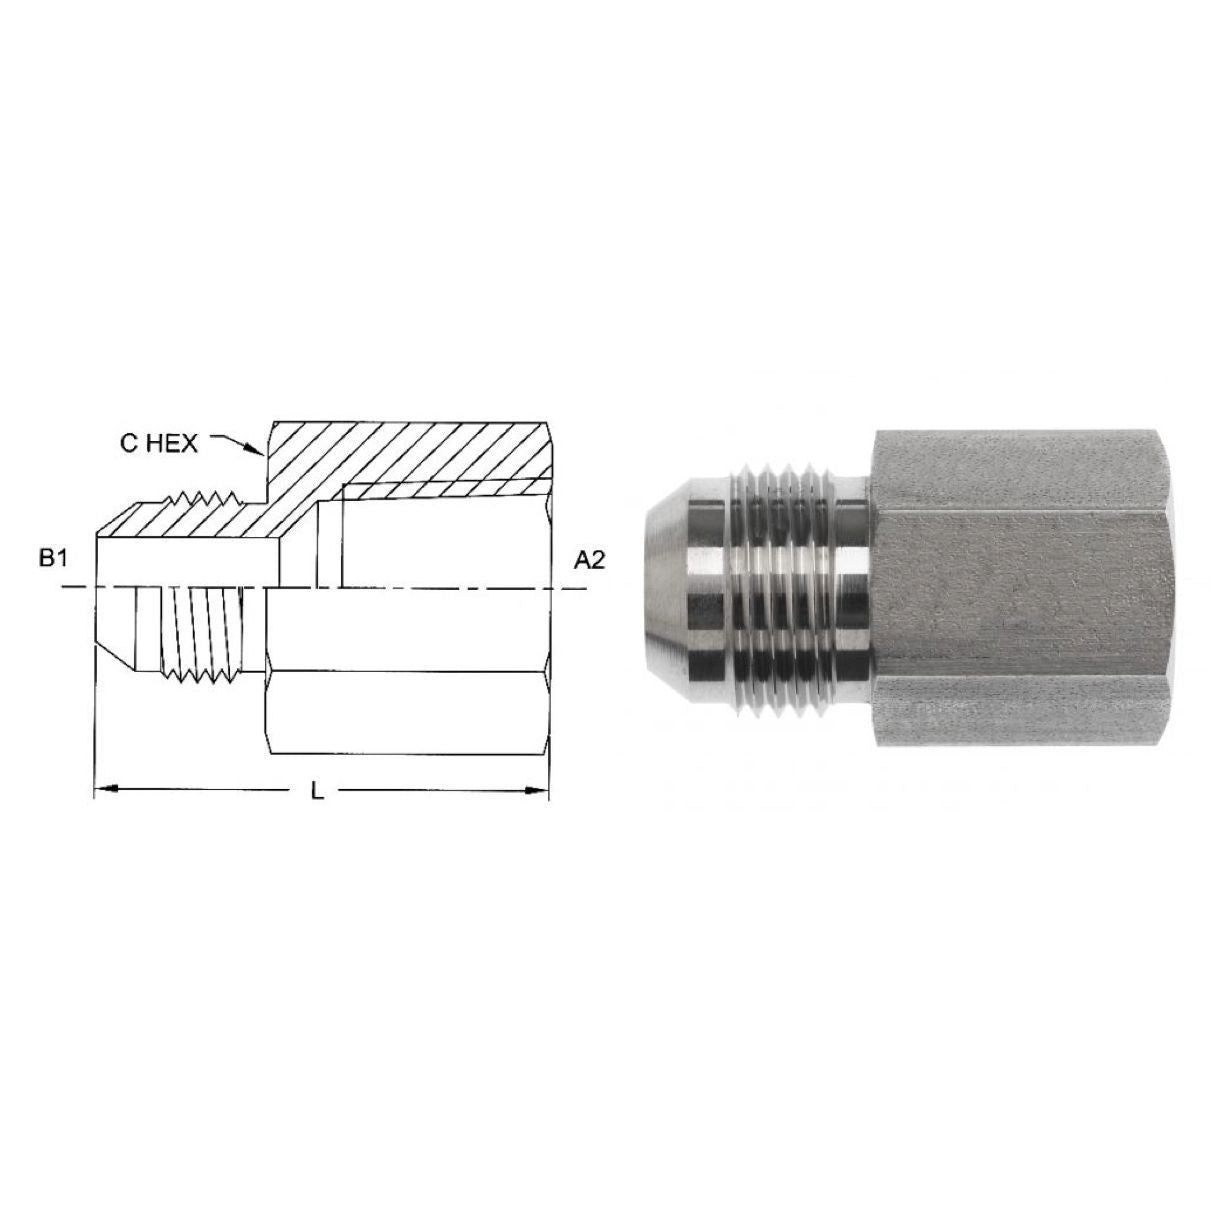 2405-14-12 : OneHydraulics  Adapter, Straight, 0.875 (7/8") Male NPT x 0.75 (3/4") Female, Steel, 4000psi